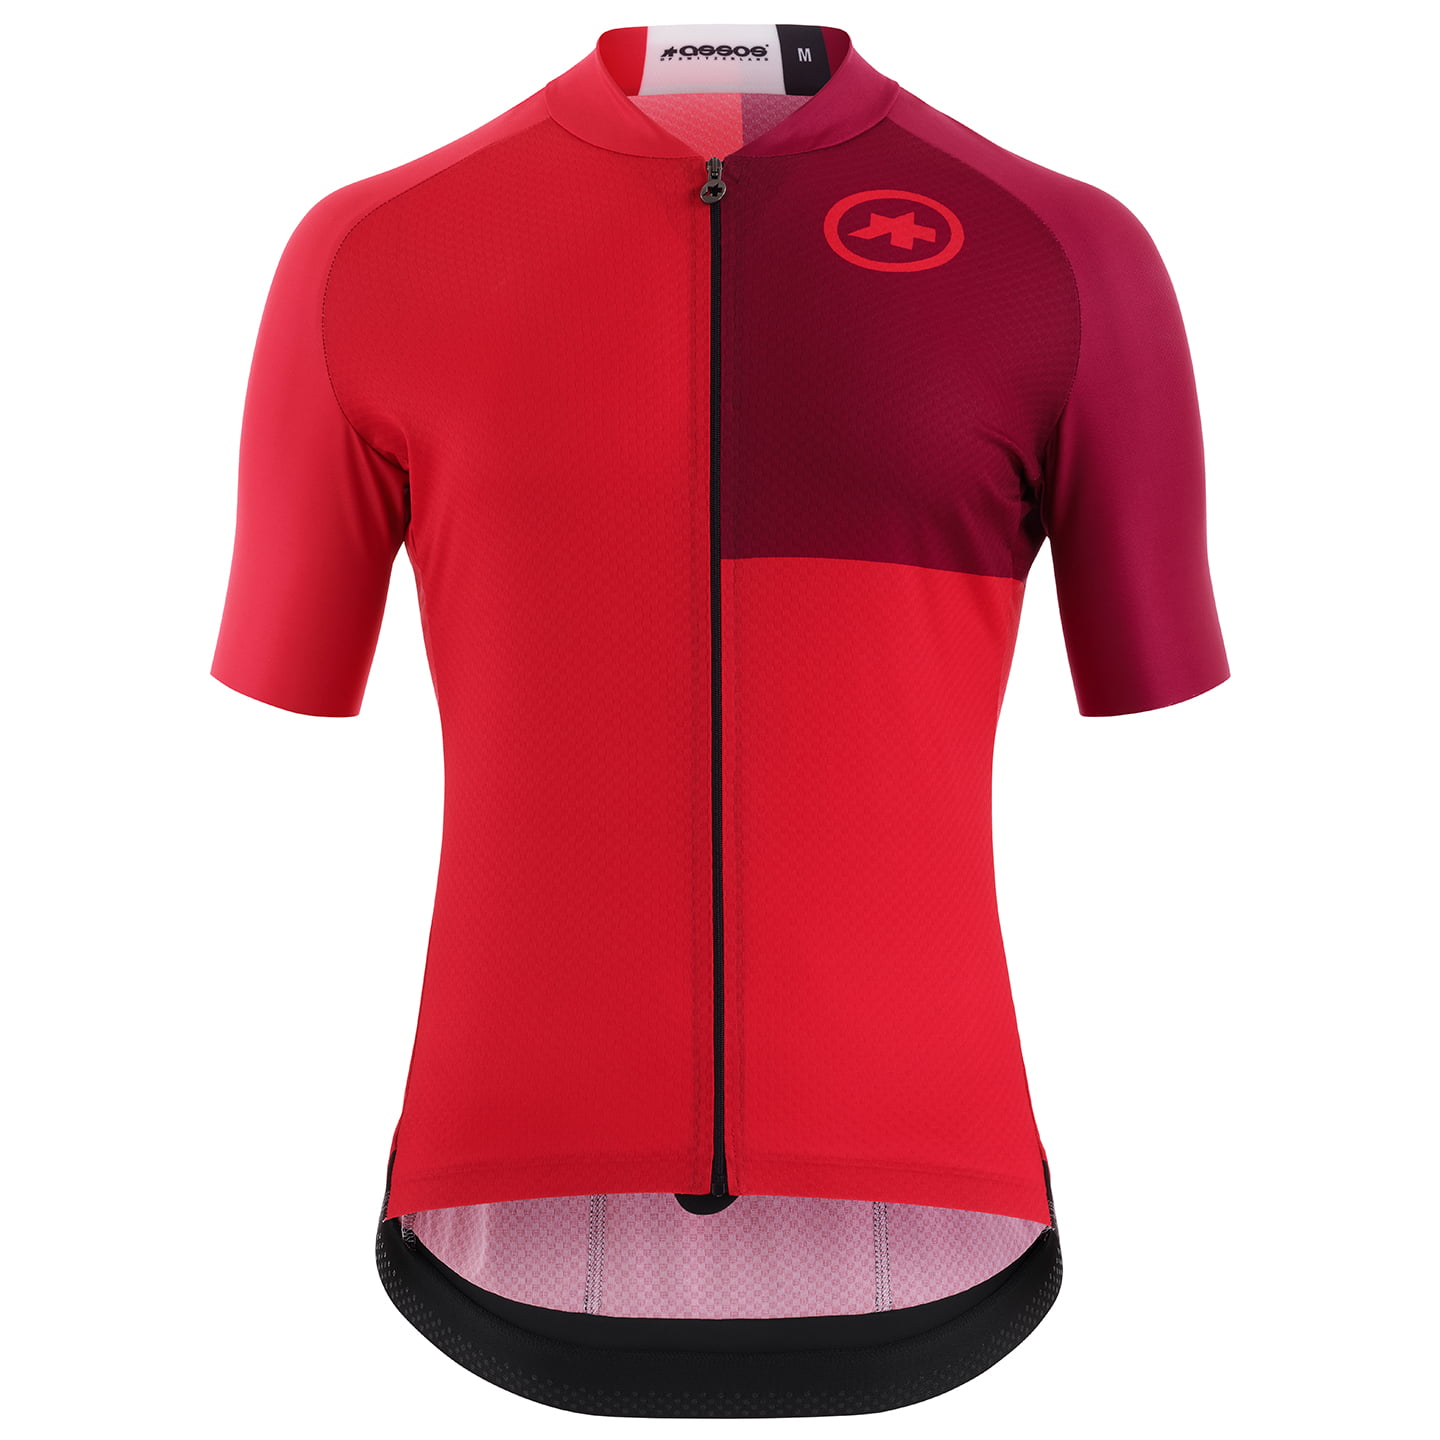 ASSOS Mille GT C2 EVO Stahlstern Short Sleeve Jersey Short Sleeve Jersey, for men, size 2XL, Cycling jersey, Cycle clothing